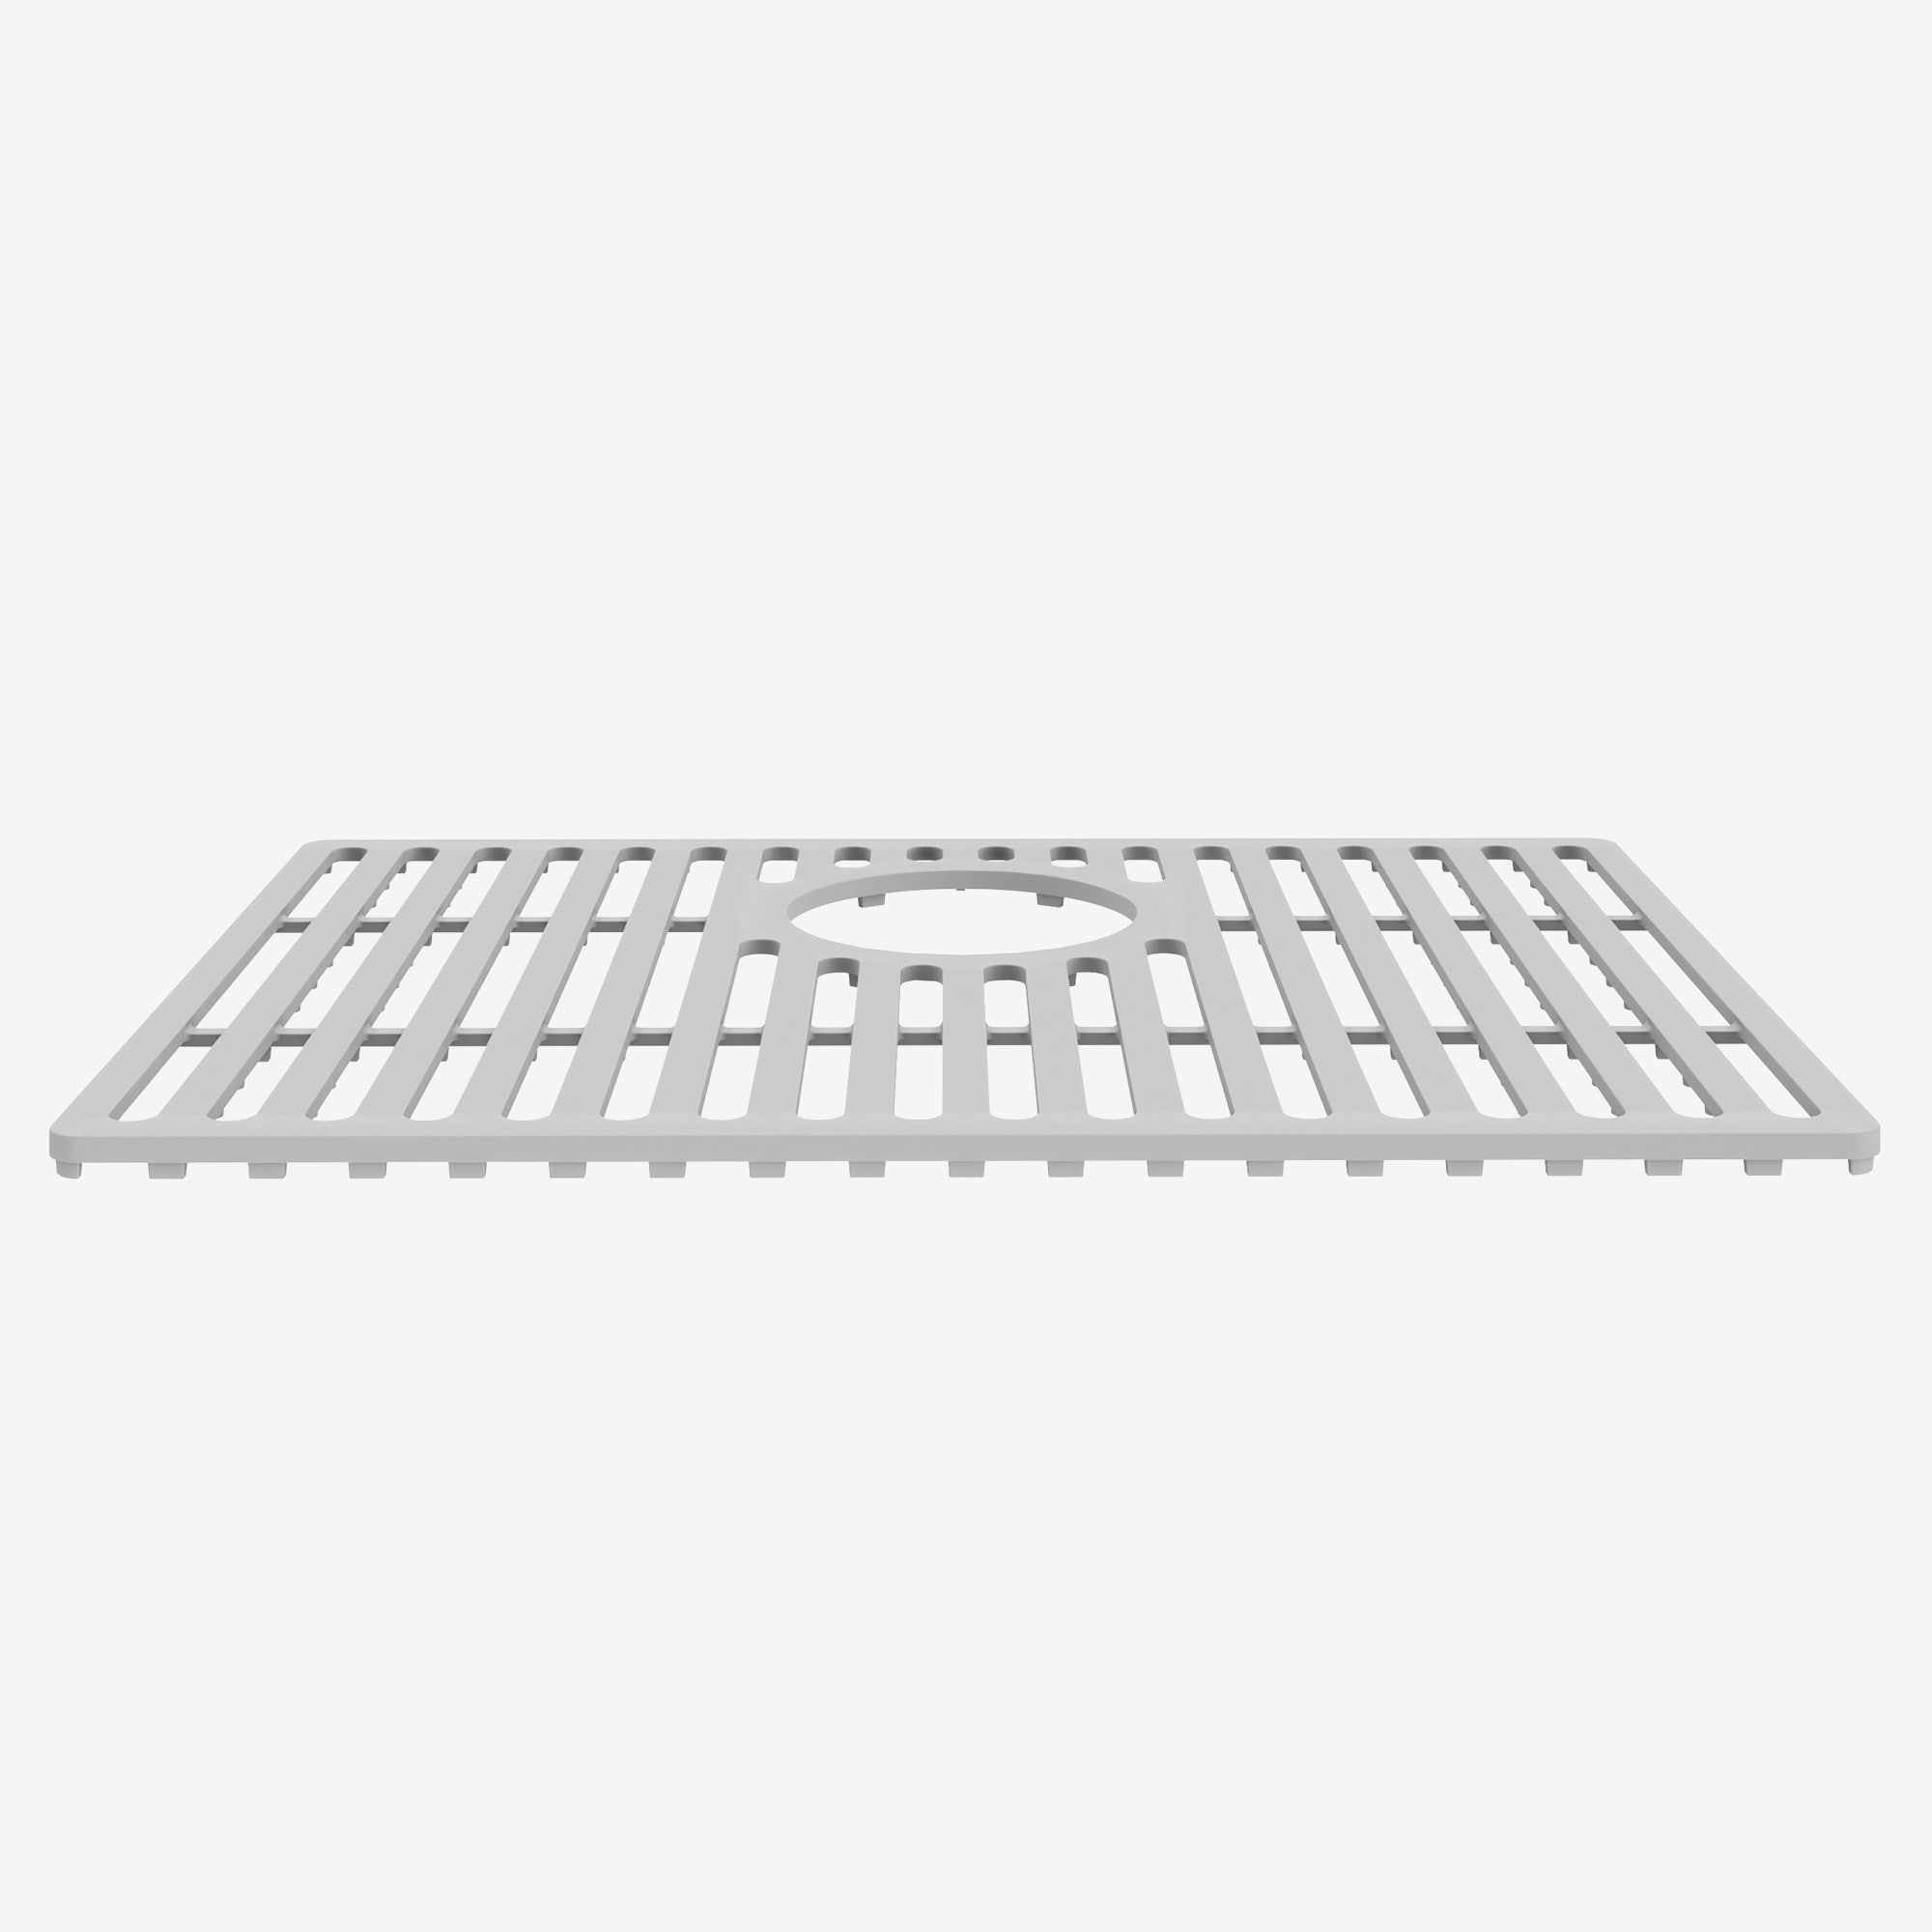 https://ak1.ostkcdn.com/images/products/is/images/direct/f95e1ad1bd38a47a1834c6d29bc4cb241db3b8f5/VIGO-Silicone-Protective-Single-Basin-Kitchen-Sink-Grid.jpg